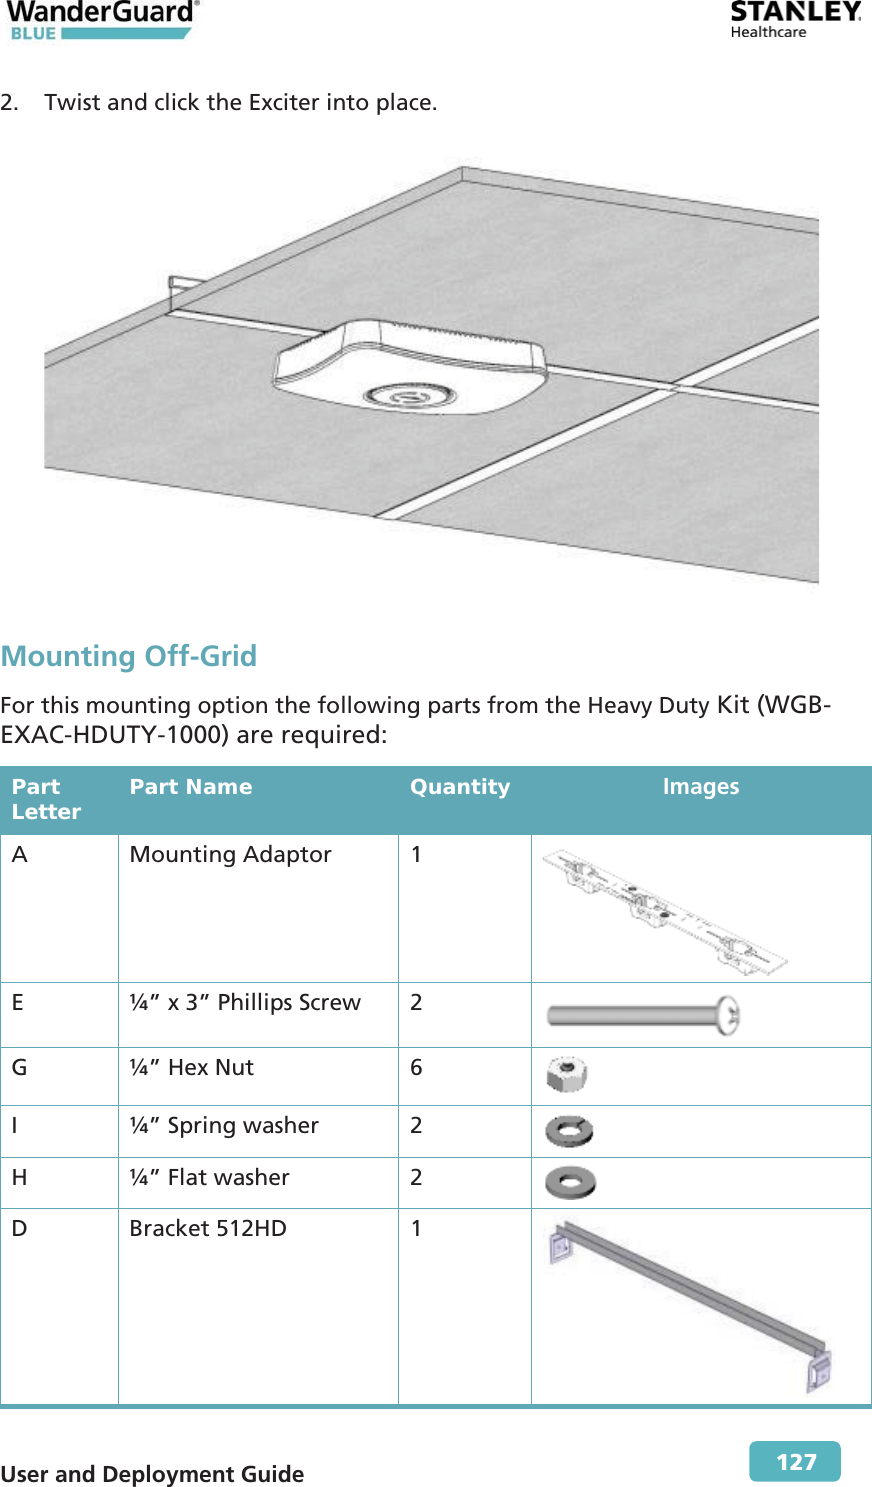  User and Deployment Guide        127 2. Twist and click the Exciter into place.  Mounting Off-Grid For this mounting option the following parts from the Heavy Duty Kit (WGB-EXAC-HDUTY-1000) are required: Part Letter  Part Name  Quantity  Images A Mounting Adaptor 1  E  ¼” x 3” Phillips Screw  2  G  ¼” Hex Nut  6 I  ¼” Spring washer  2   H  ¼” Flat washer  2   D Bracket 512HD  1  